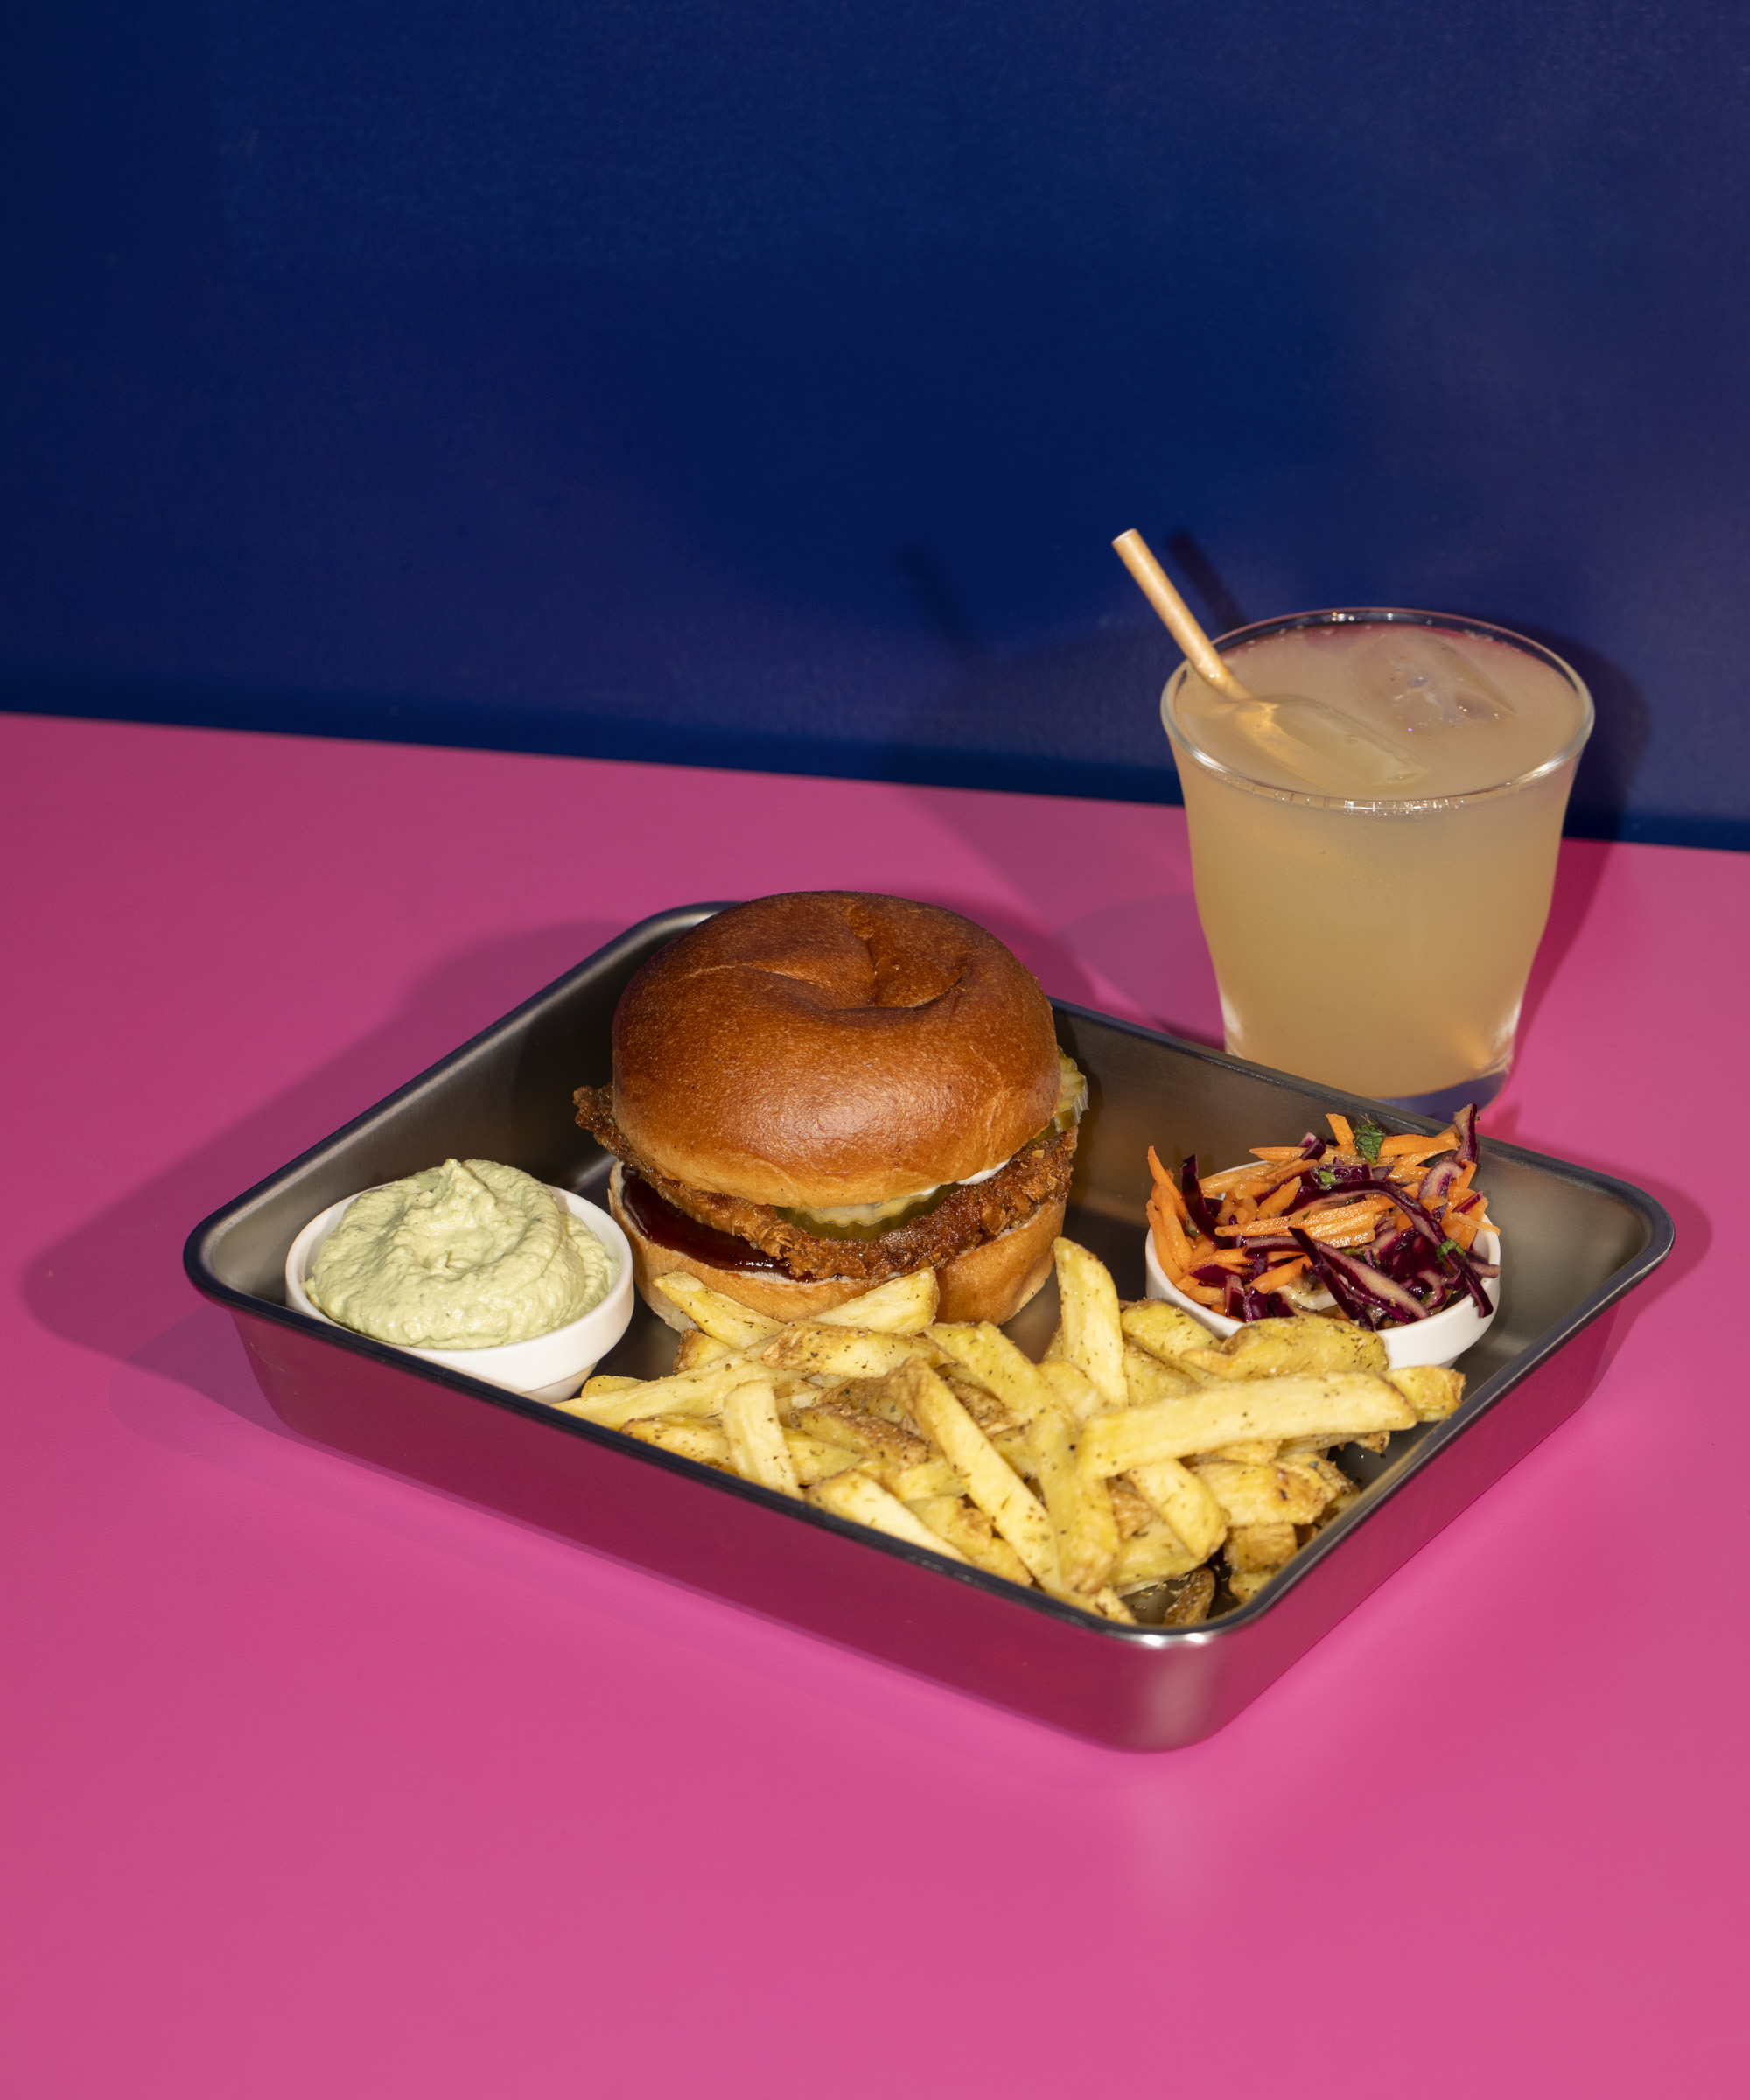 Pick any burger combo + lemonade at Eden Jaxx in Vesterbro, Østerbro, and inside ILLUM – One of the best burgers in the city happens to be meat-free